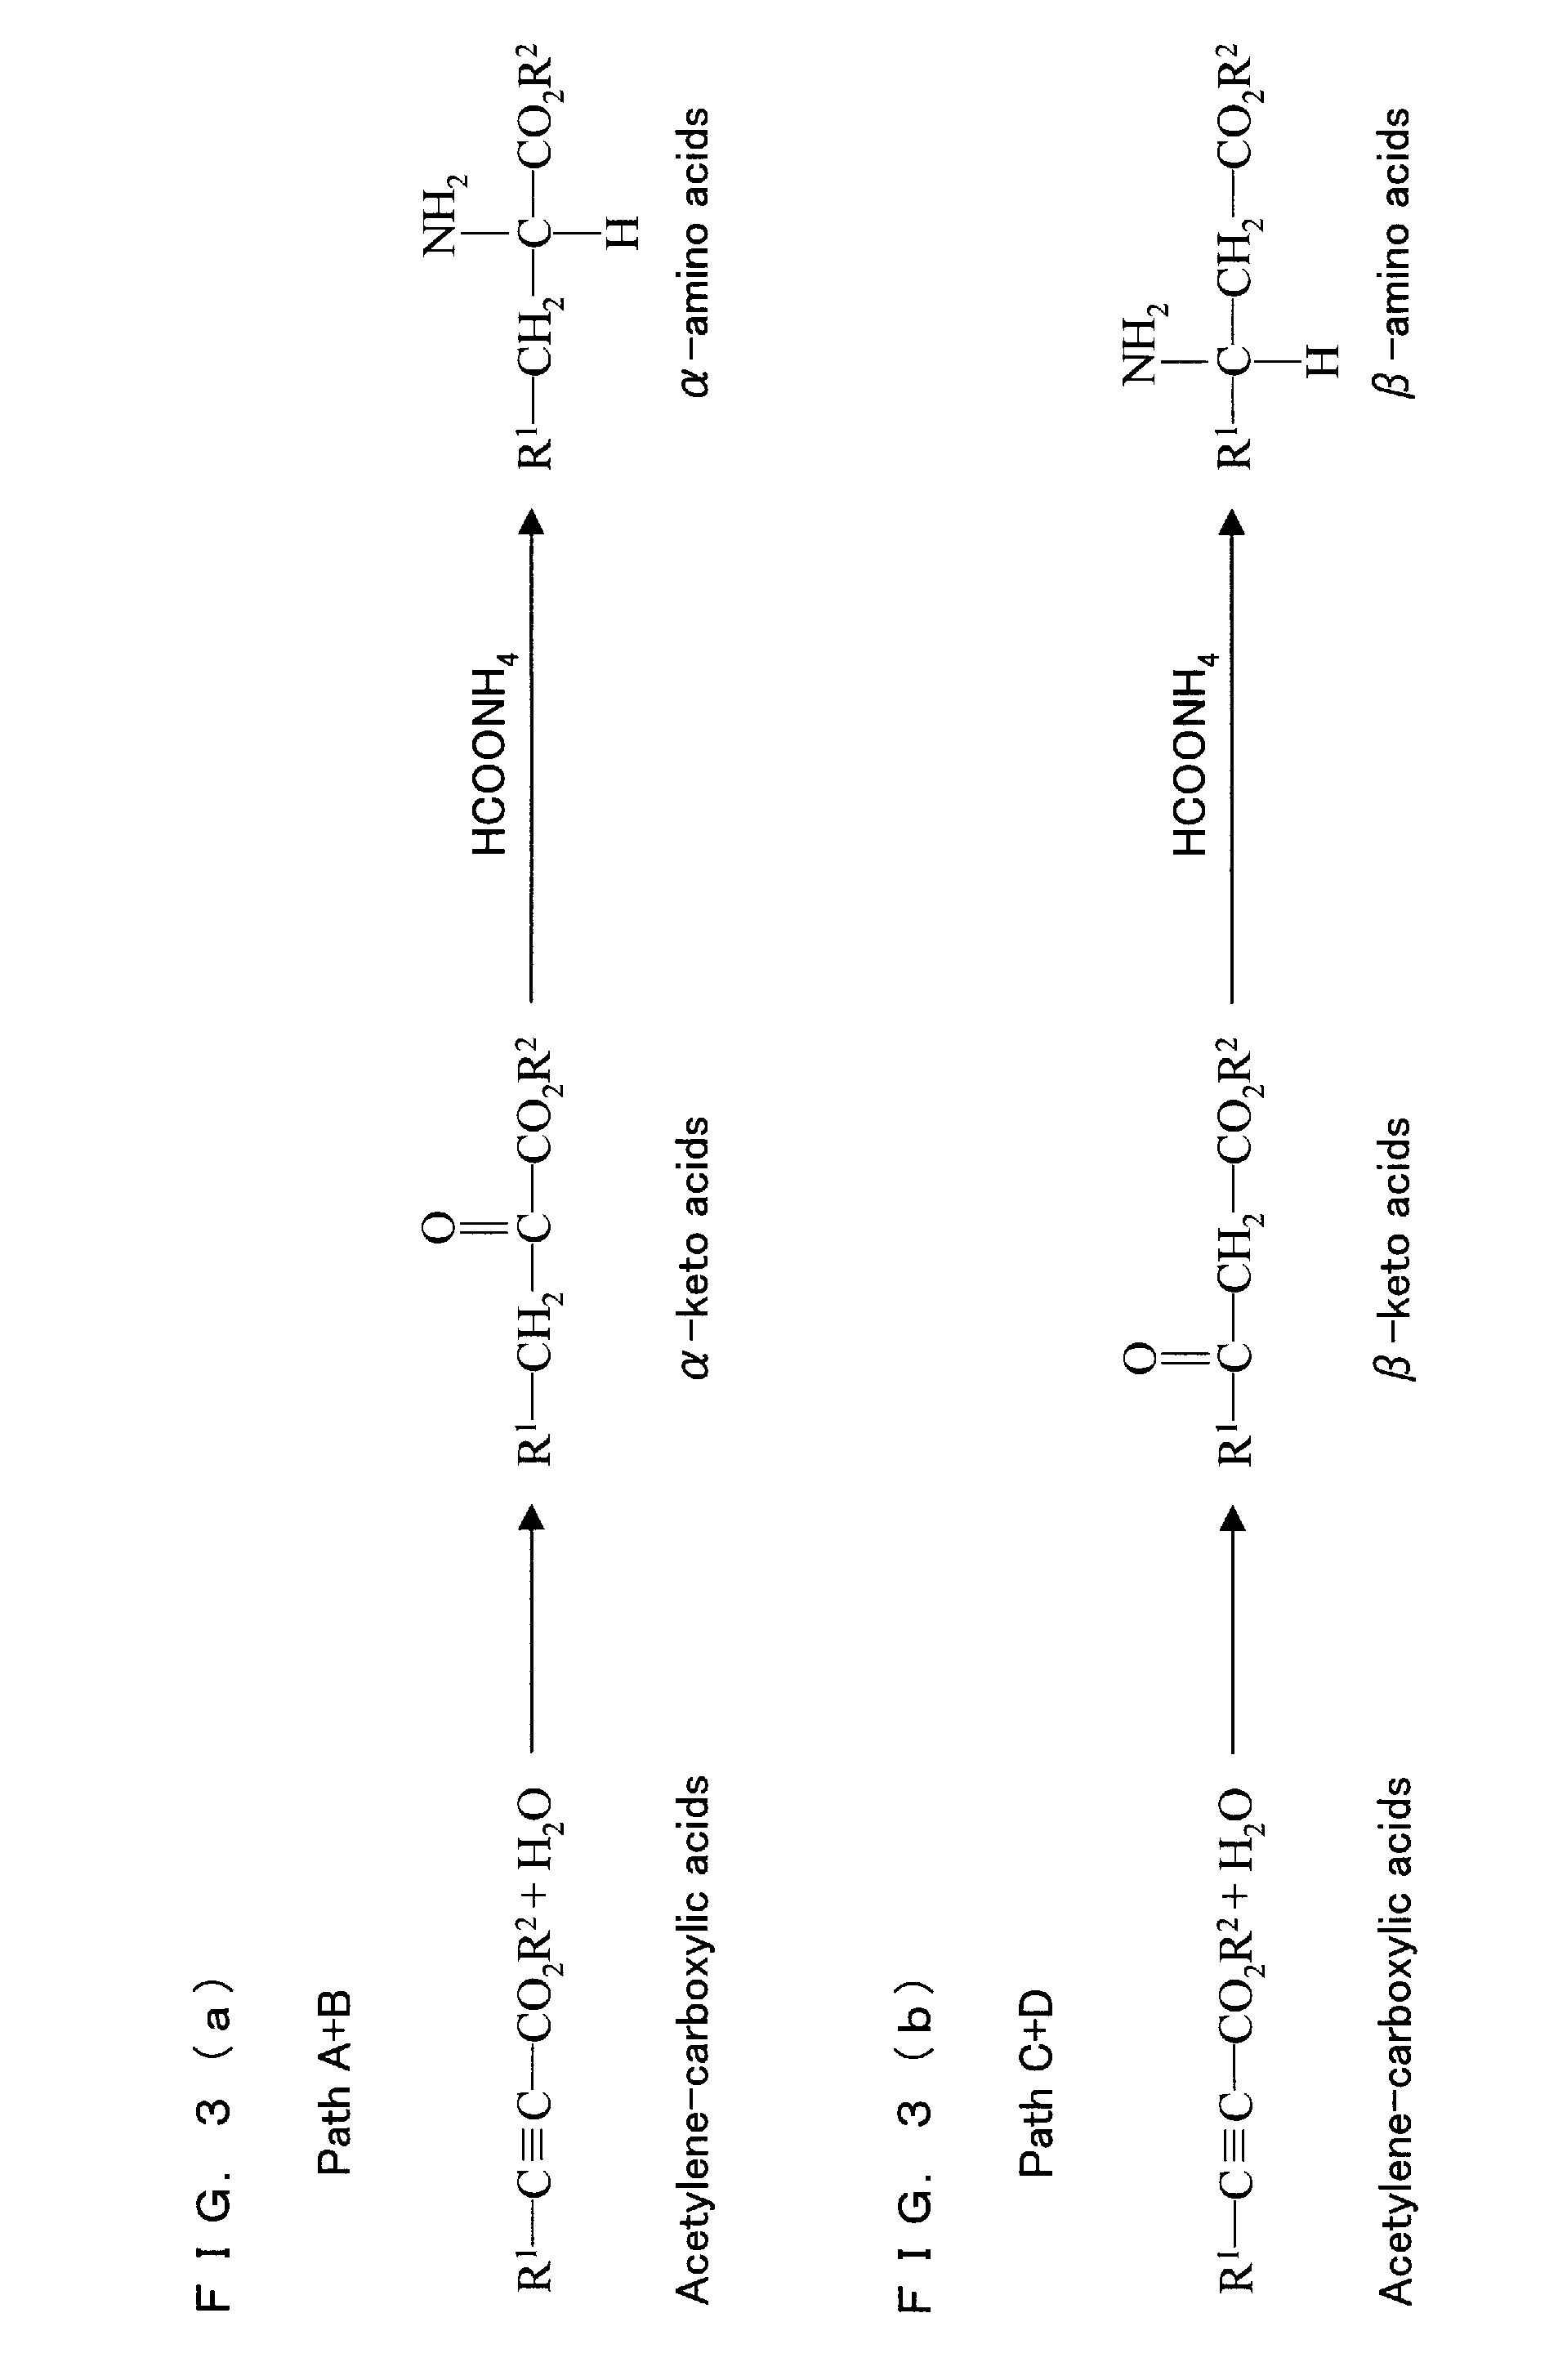 Method for synthesis of keto acids or amino acids by hydration of acetylene compound